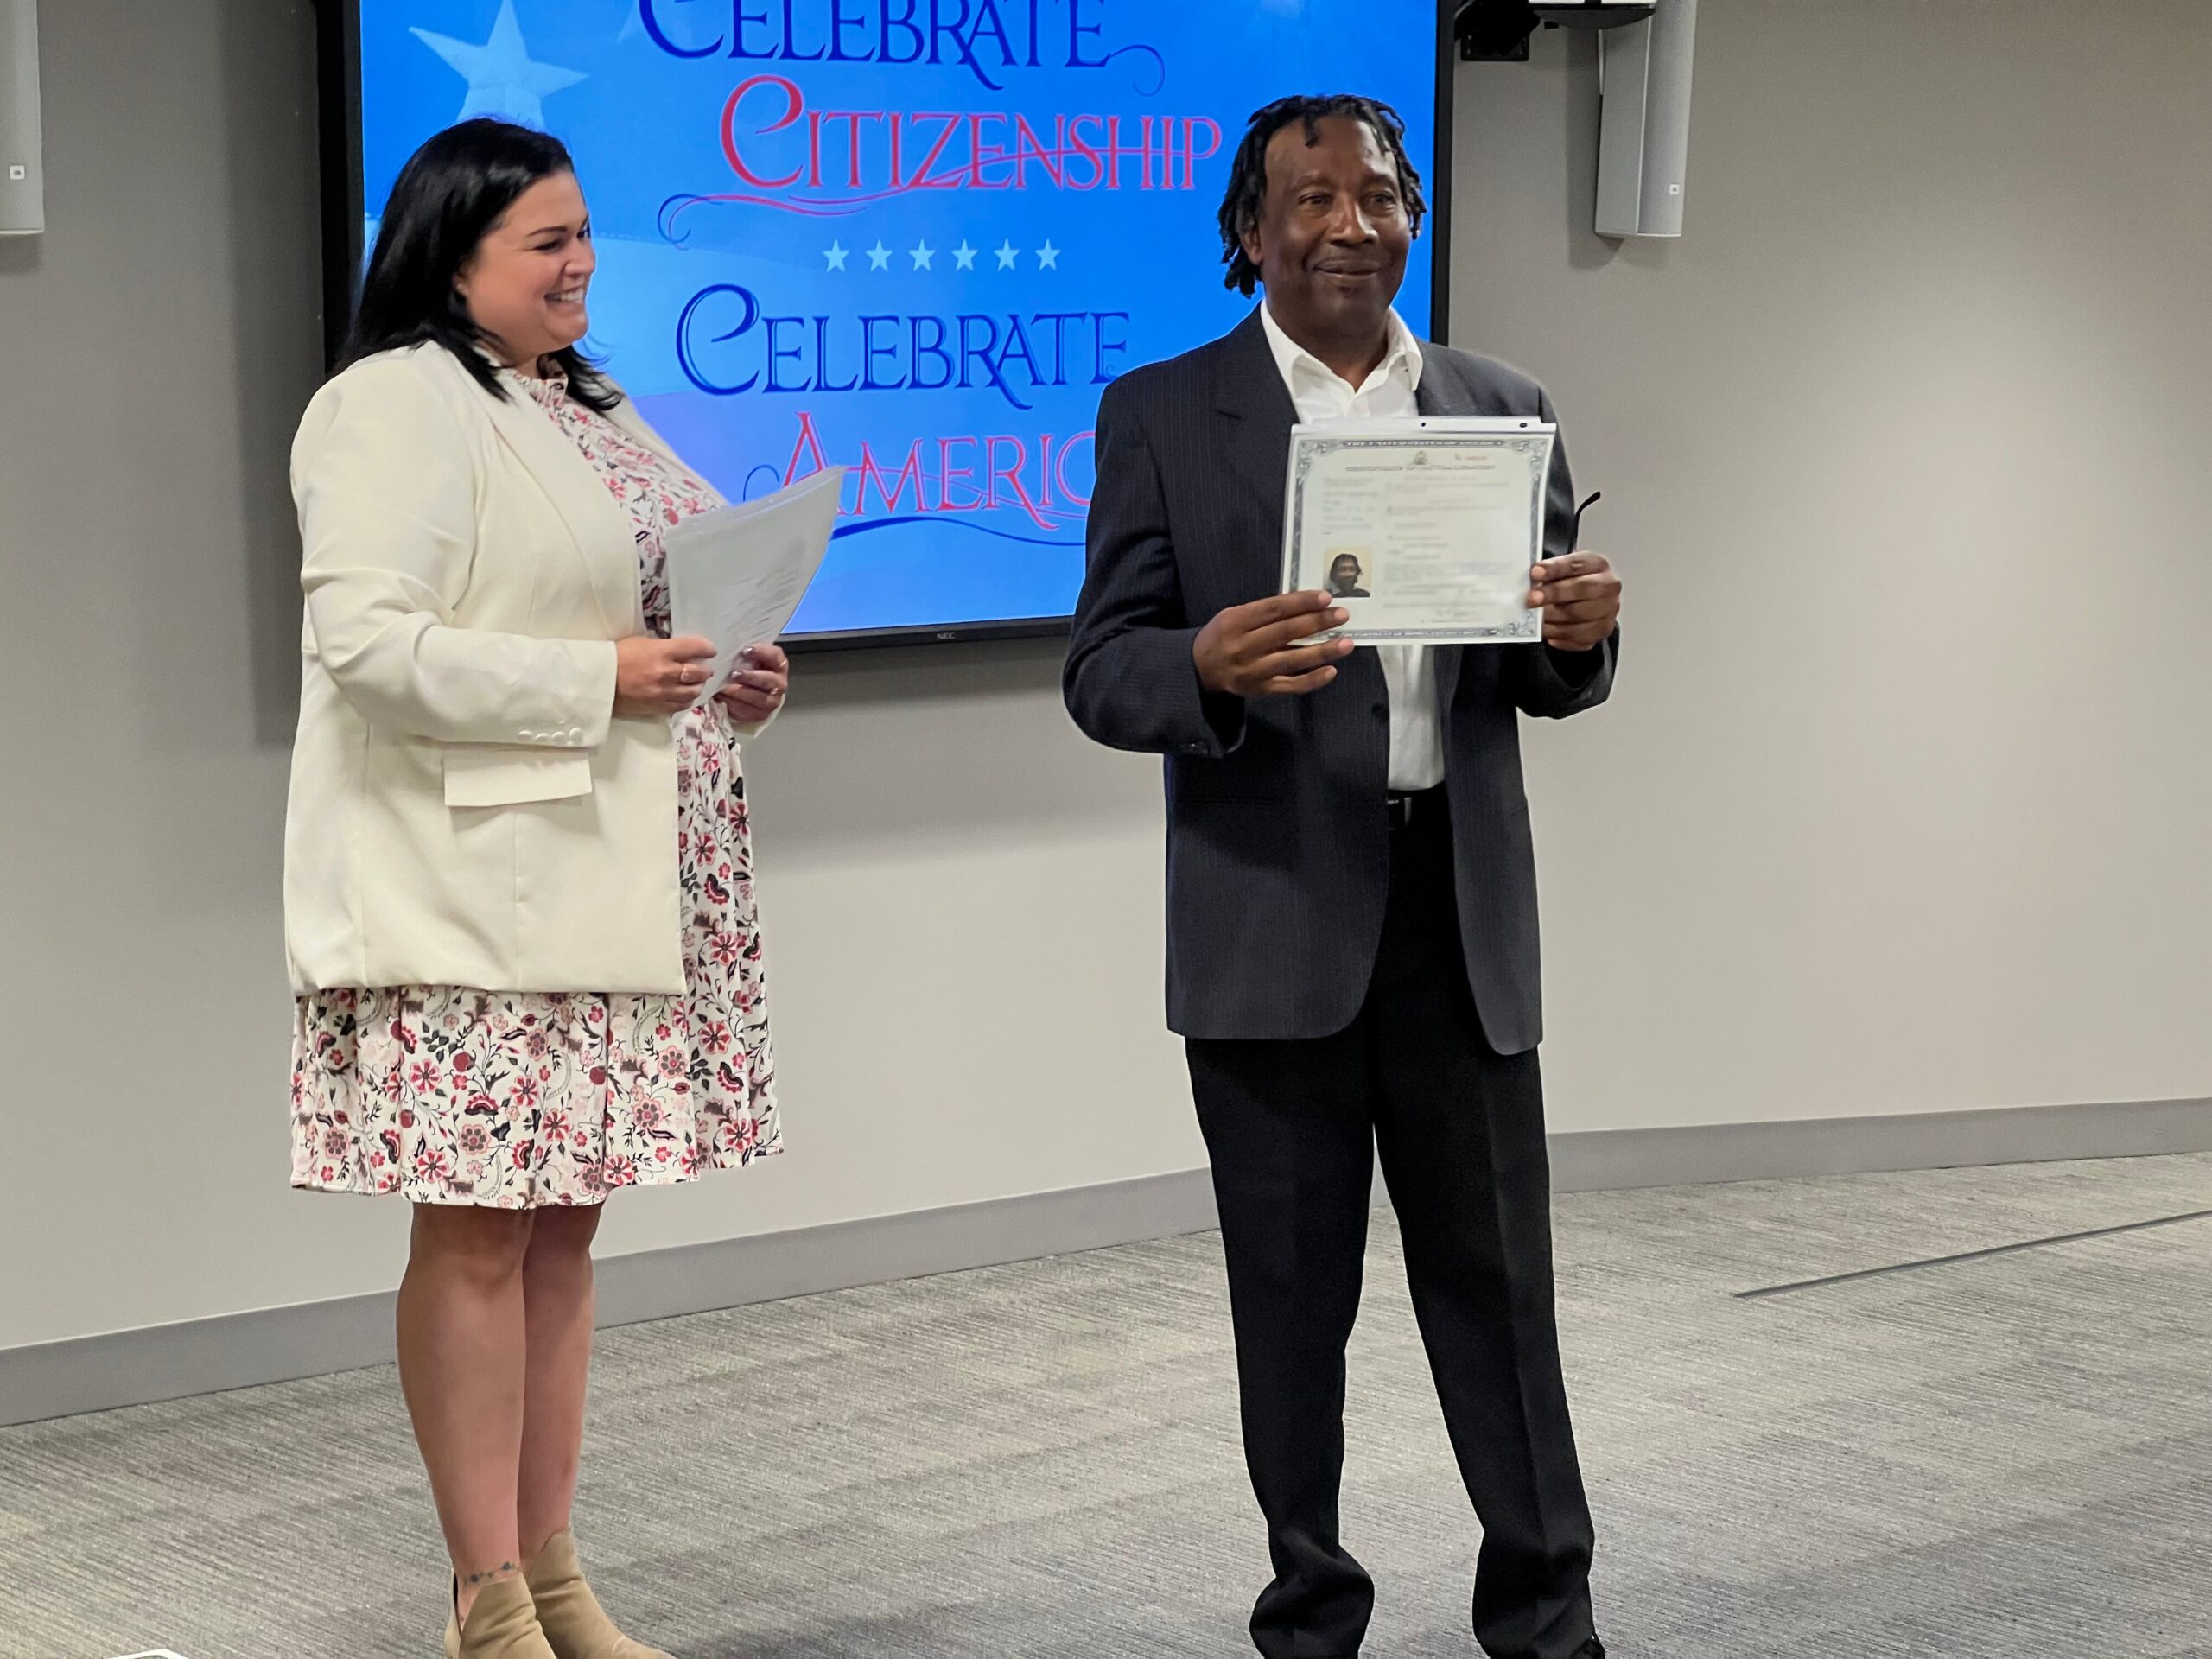 Ernesto Rodriguez of La Crosse, Wisconsin receives his certificate of naturalization at a USCIS field office in Minneapolis, Minnesota